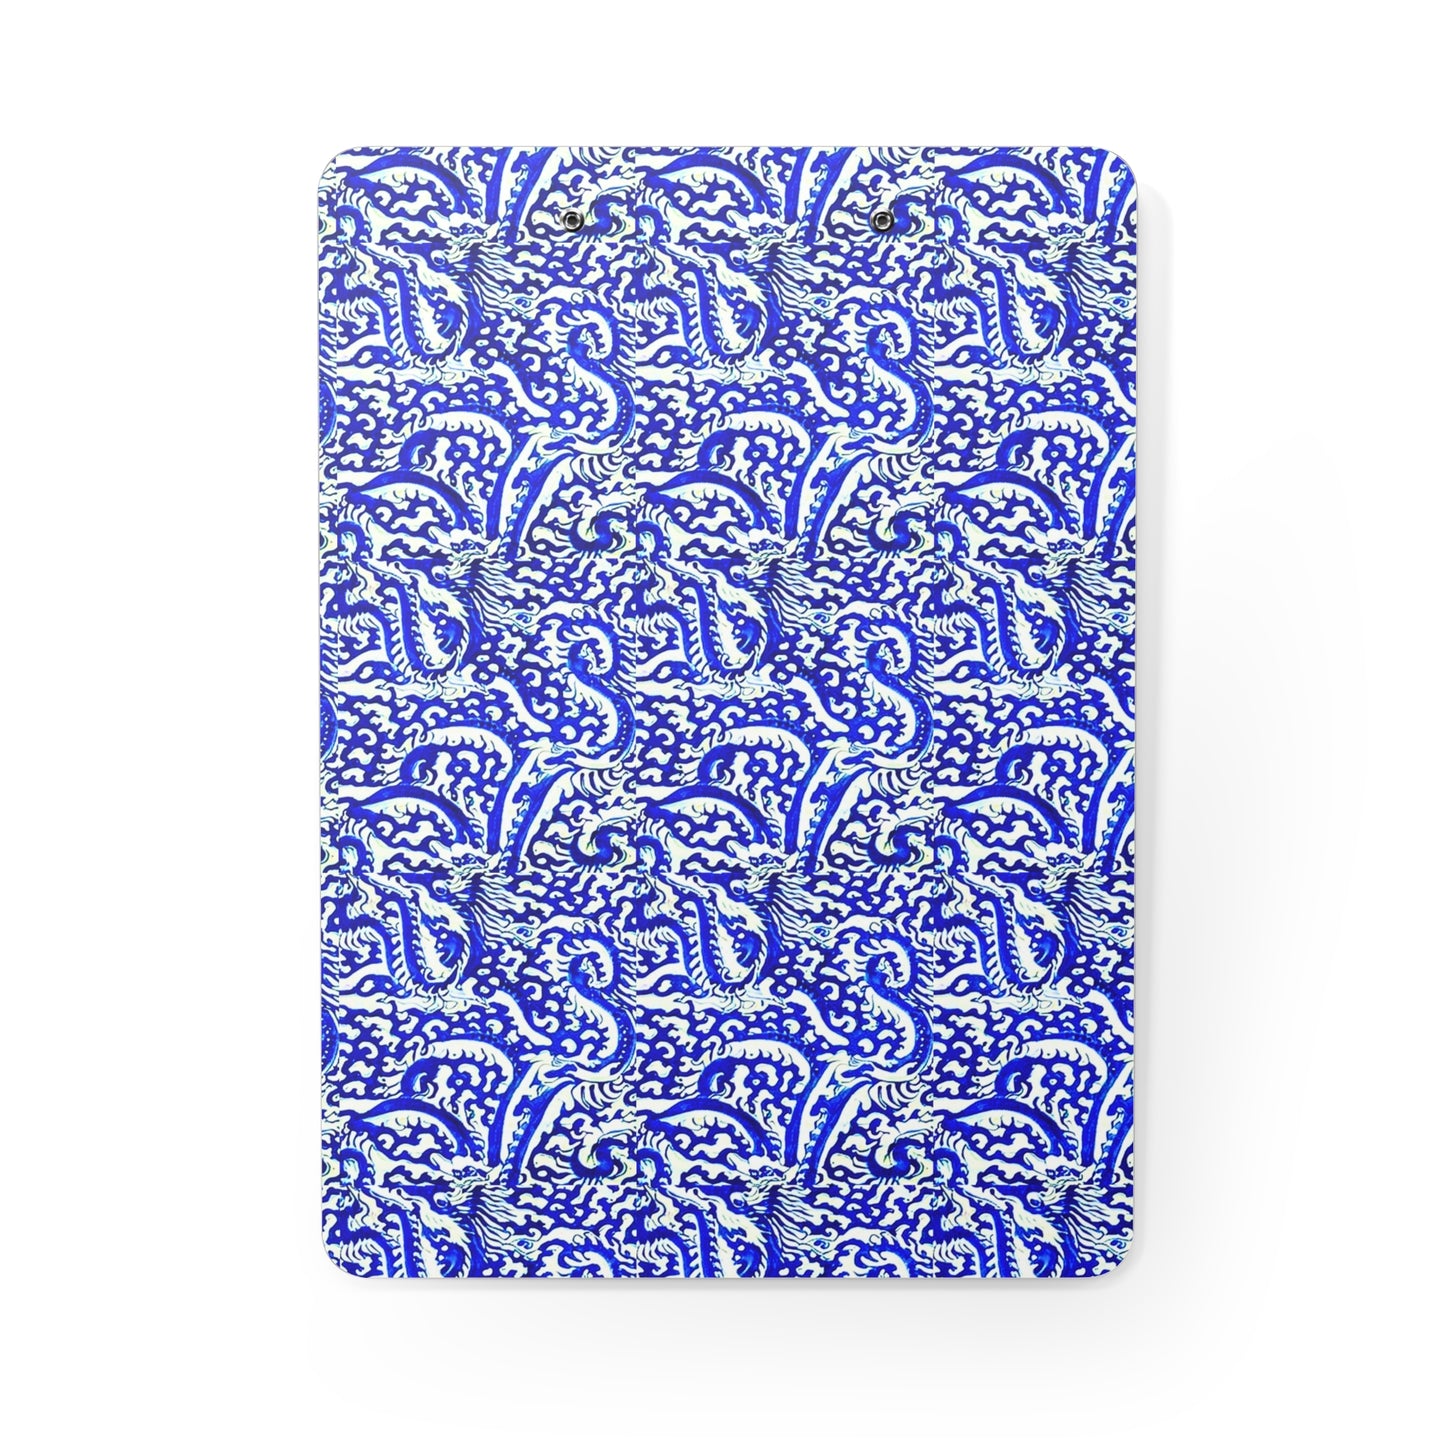 Sea of Chinese Dragons Ming Dynasty Blue and White Porcelain Desk Task Clipboard